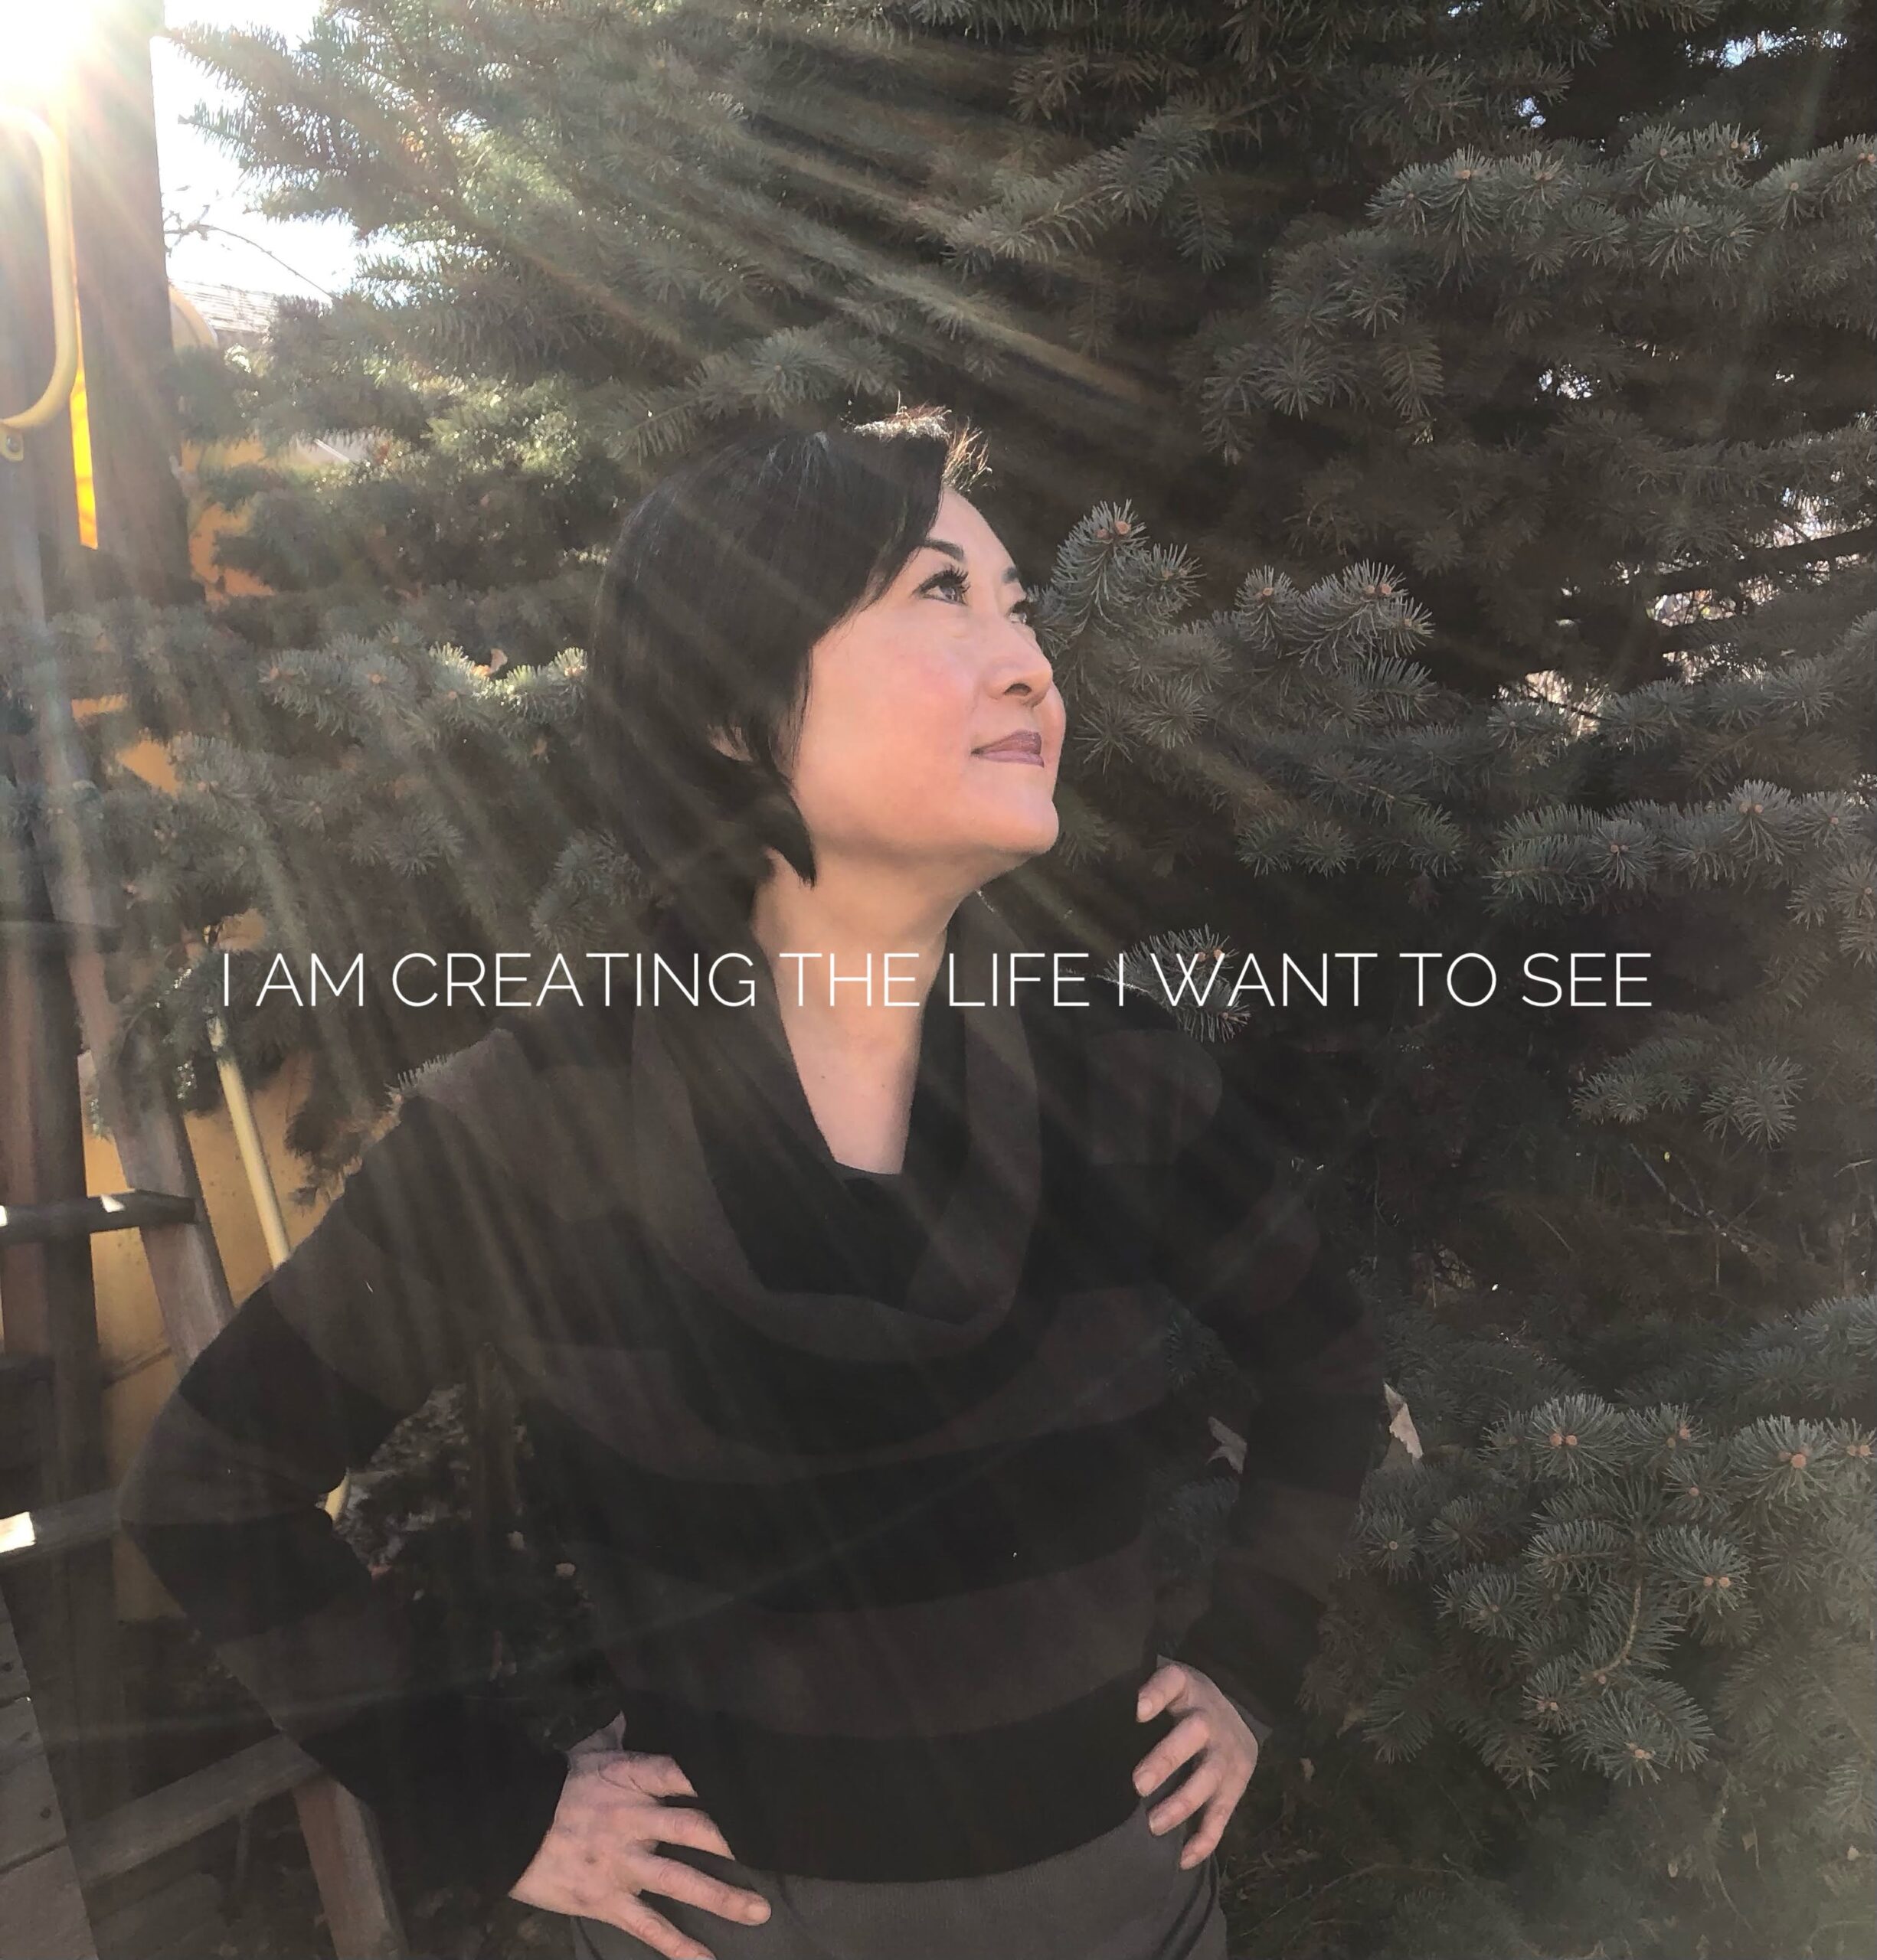 Thuy dam creating the life you want to see